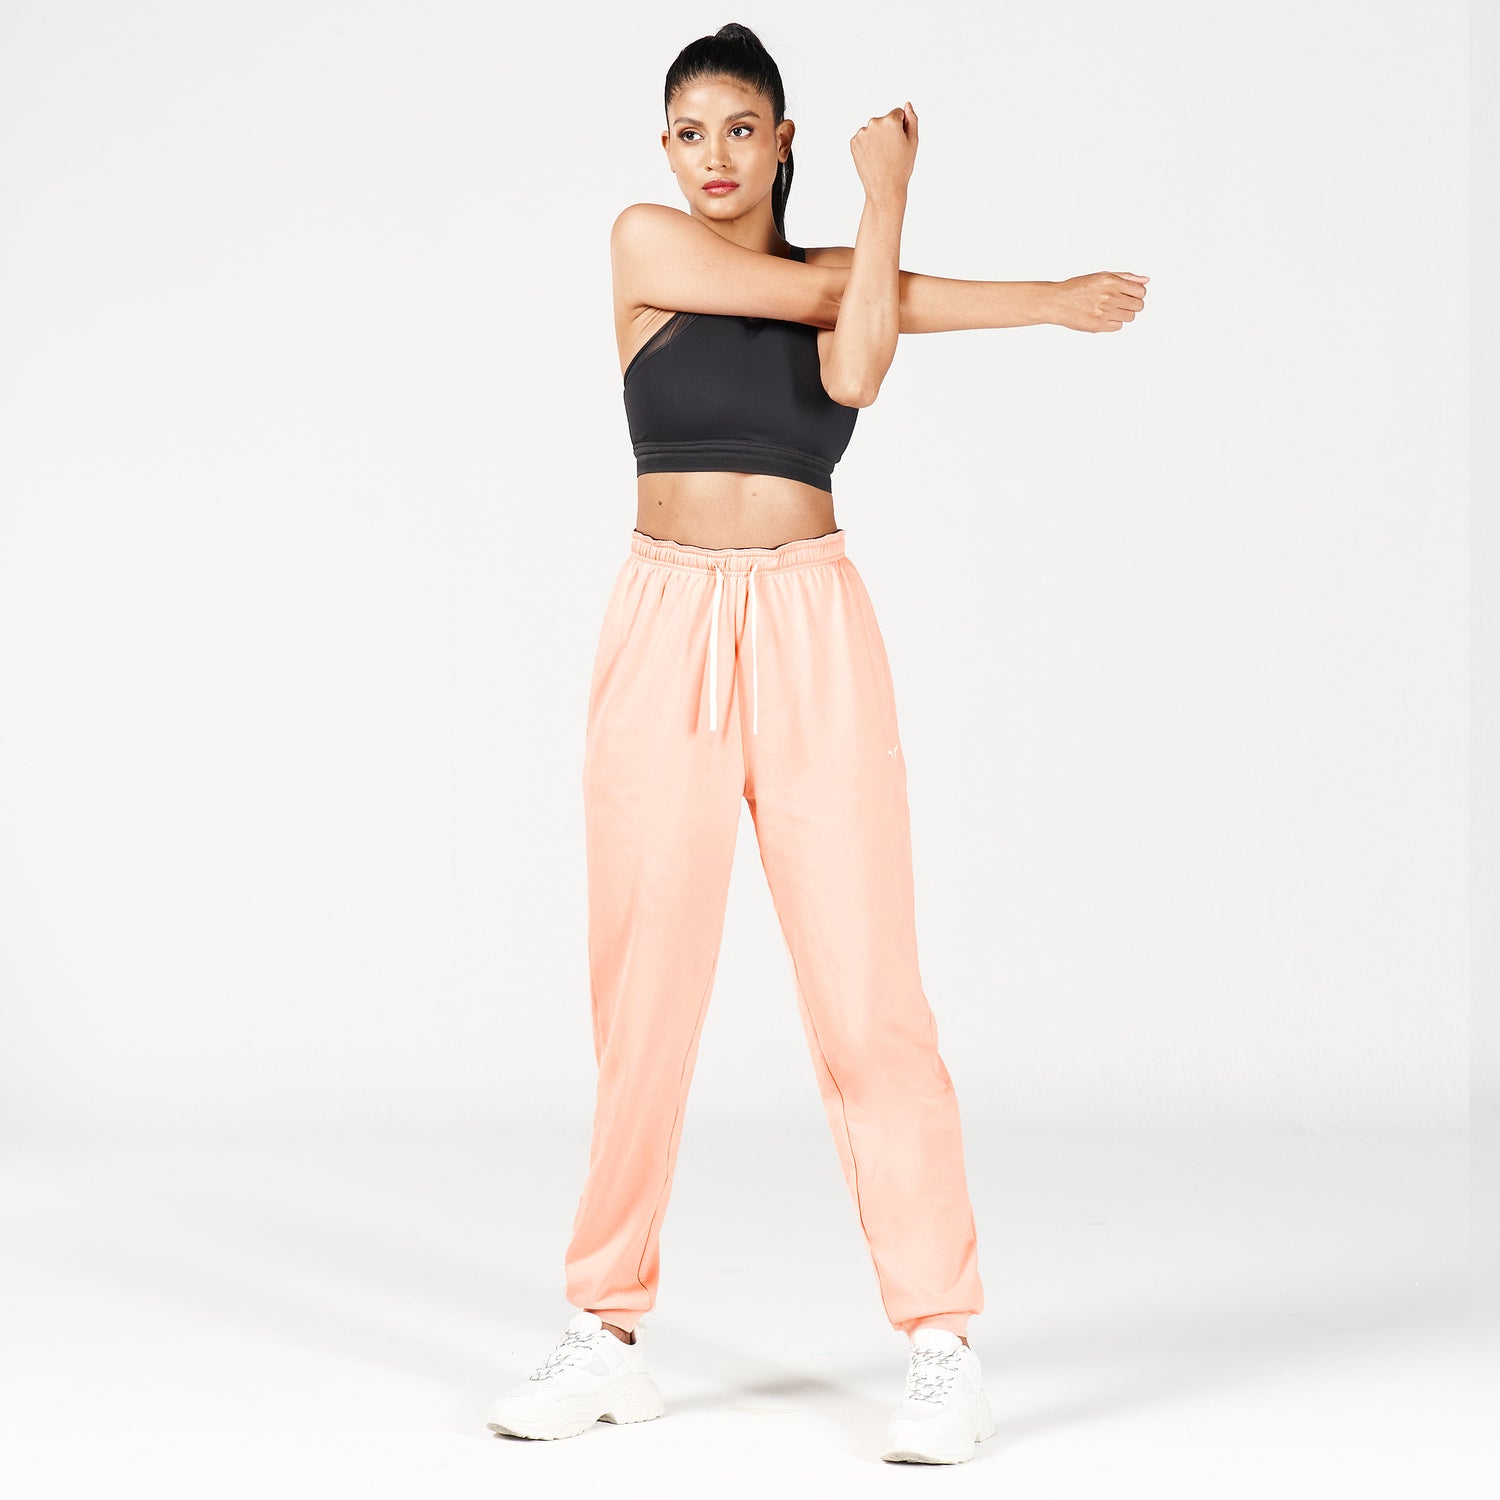 squatwolf-workout-clothes-waistband-surprise-joggers-pink-rose-gym-pants-for-women